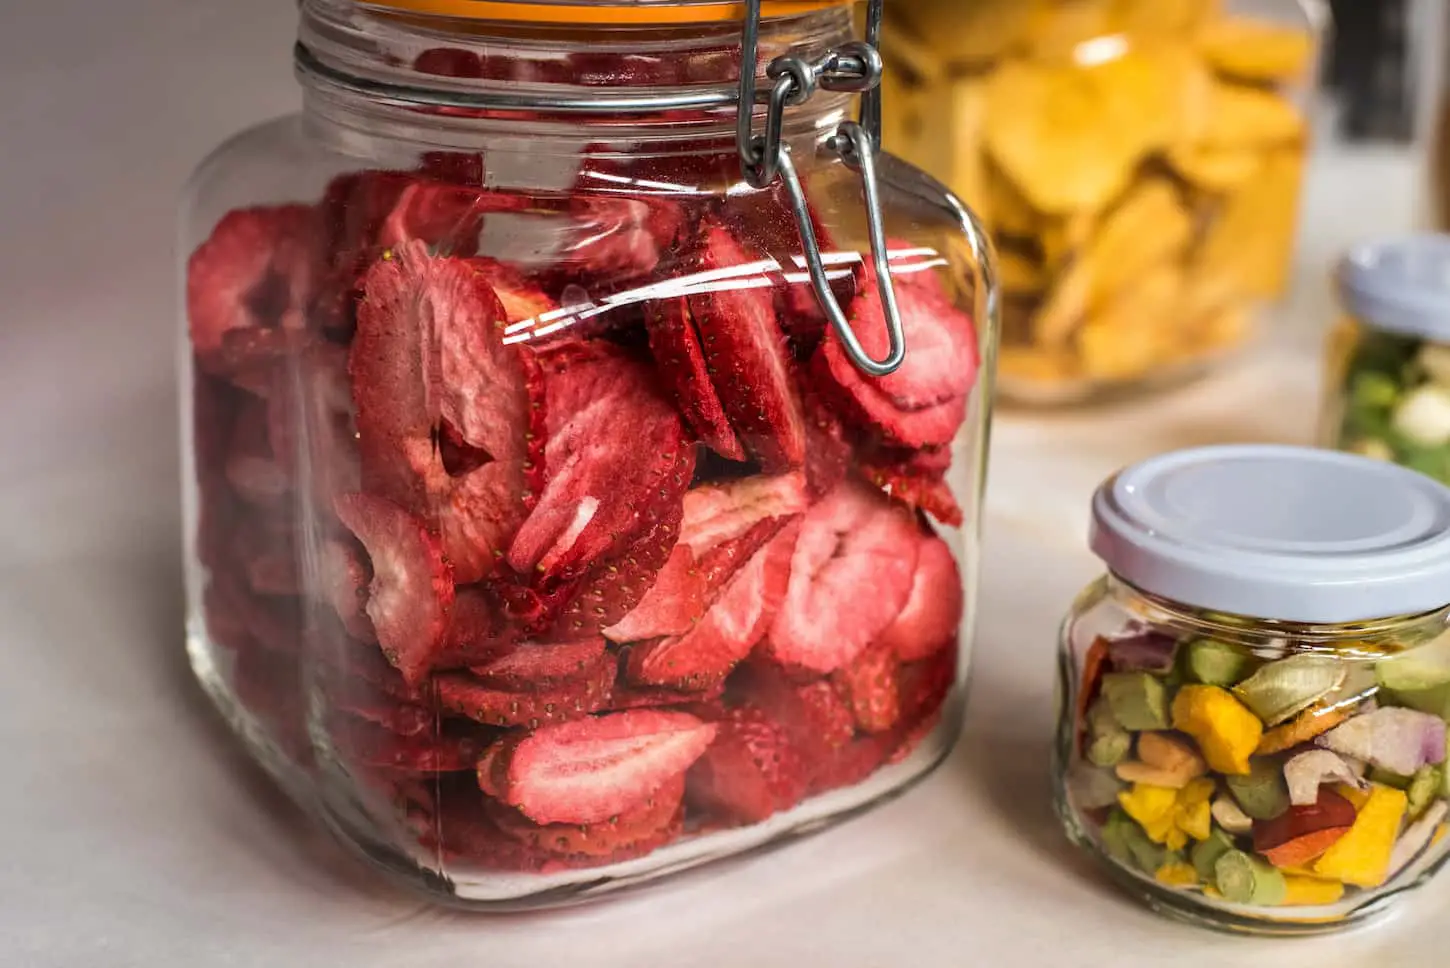 An image of freeze-dried strawberries and various vegetables in separate jars.